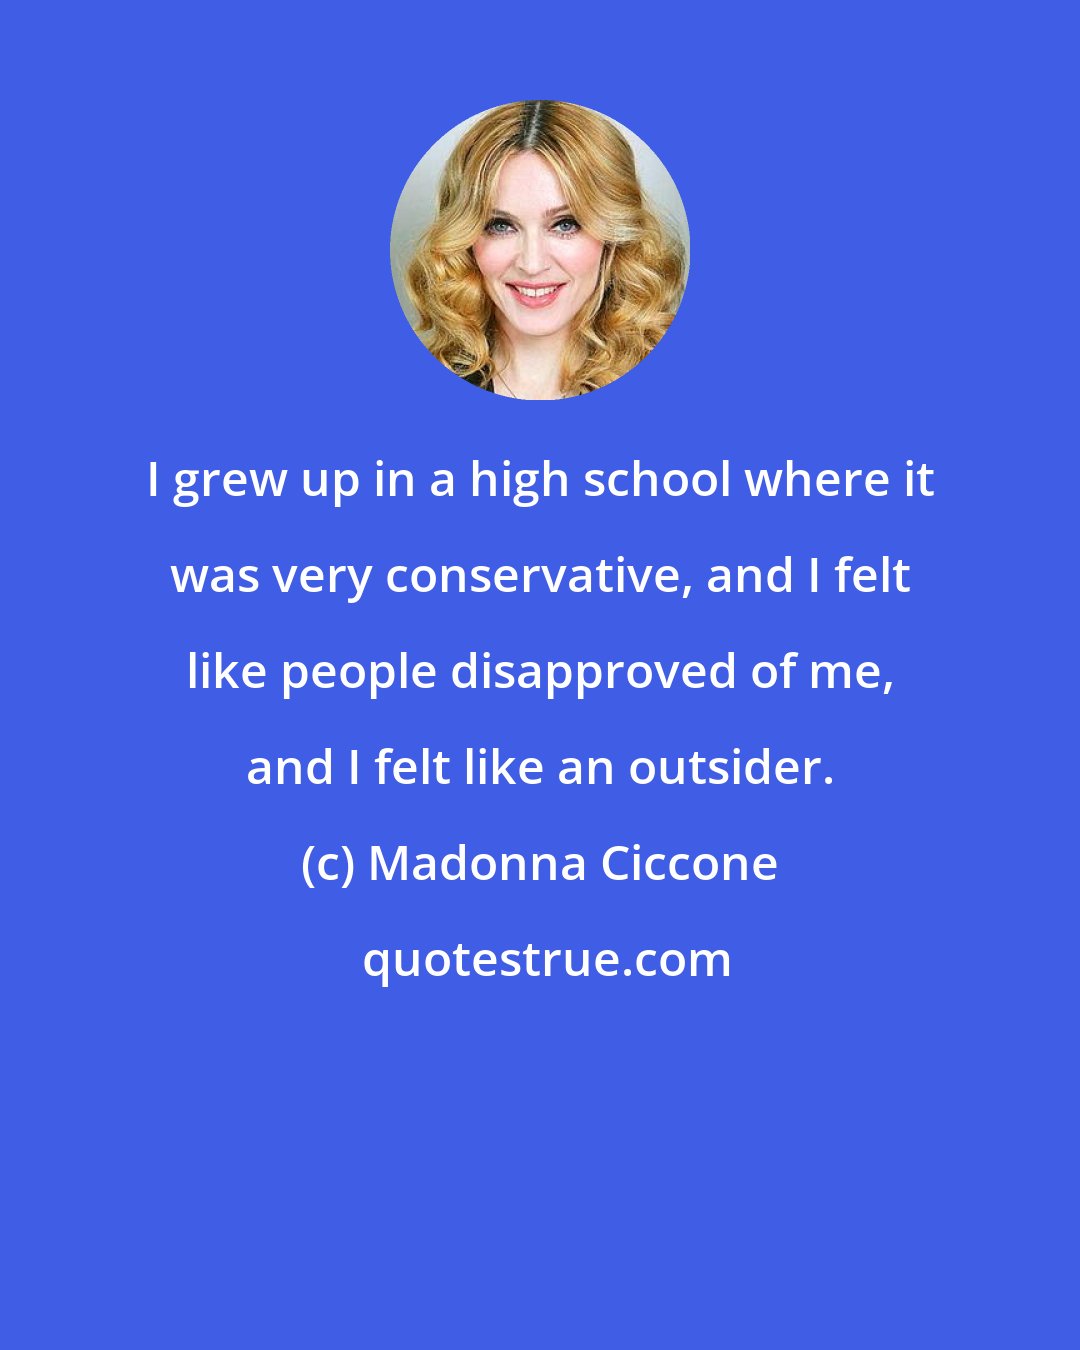 Madonna Ciccone: I grew up in a high school where it was very conservative, and I felt like people disapproved of me, and I felt like an outsider.